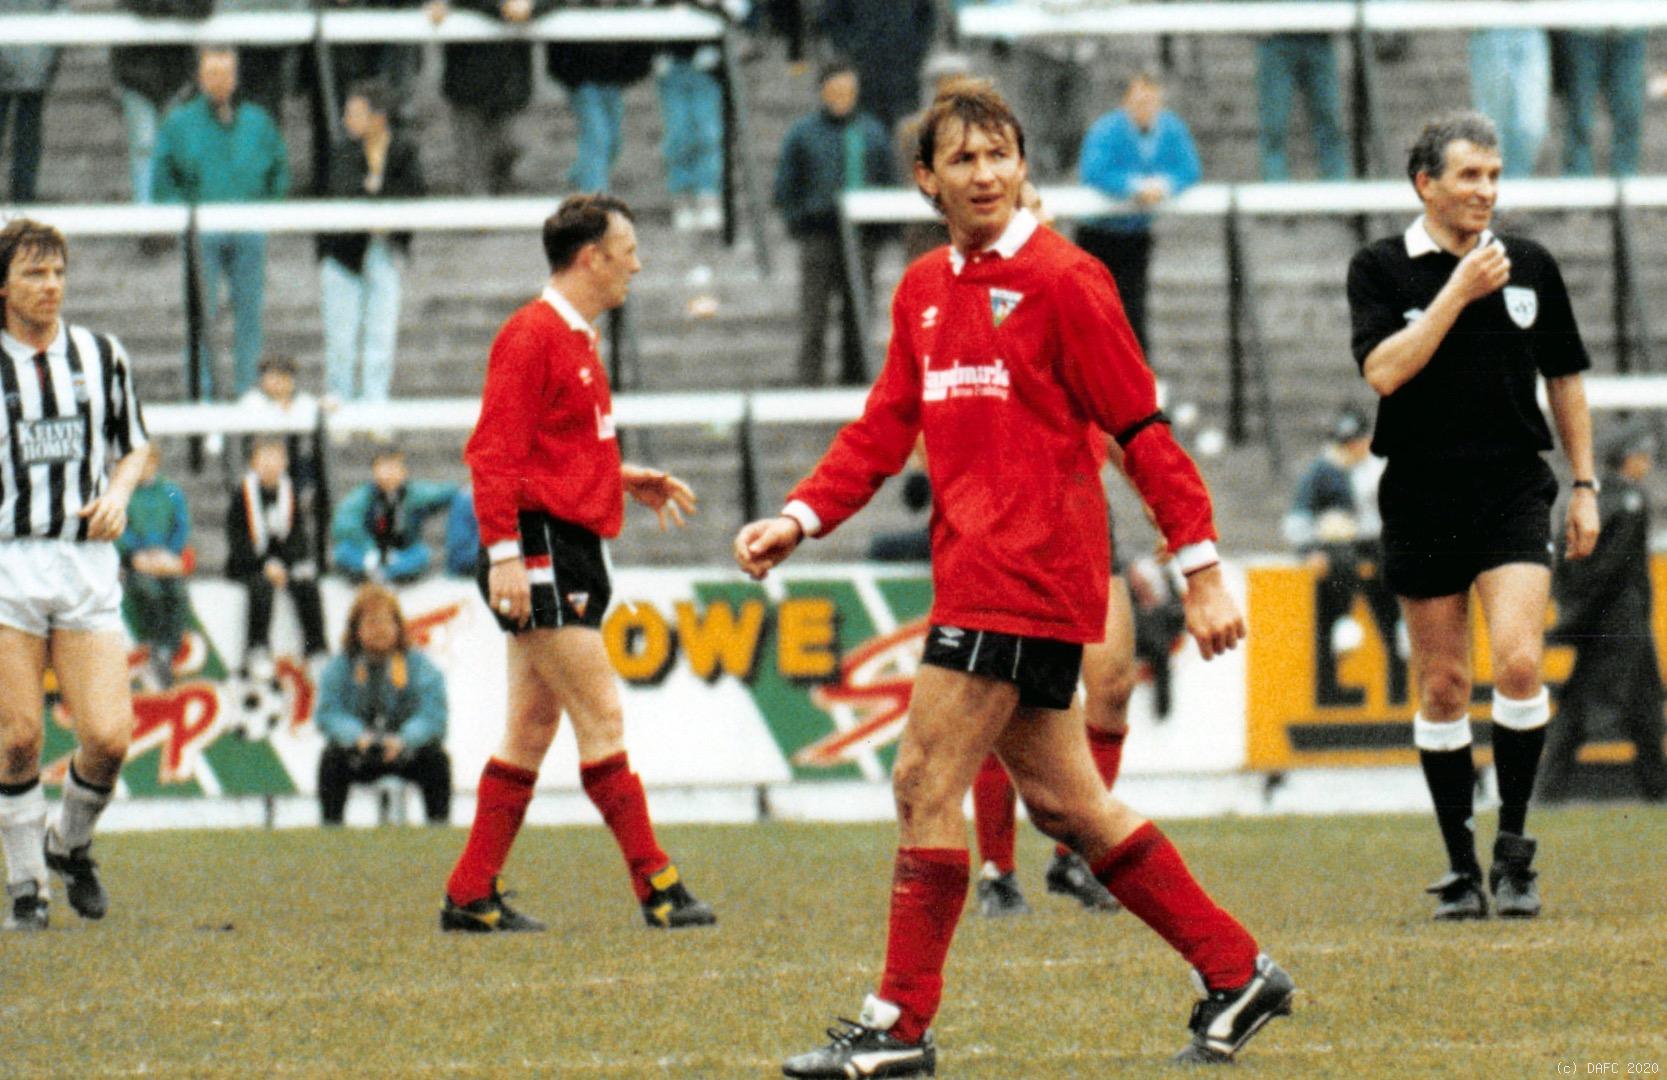 PictureThis Scotland on Twitter: "Istvan Kozma of Dunfermline Athletic.  (Apps 103, Goals 9) Midfielder. Signed from Bordeaux for a club record fee  of £540,000 in September 1989. Sold to Liverpool in 1992.